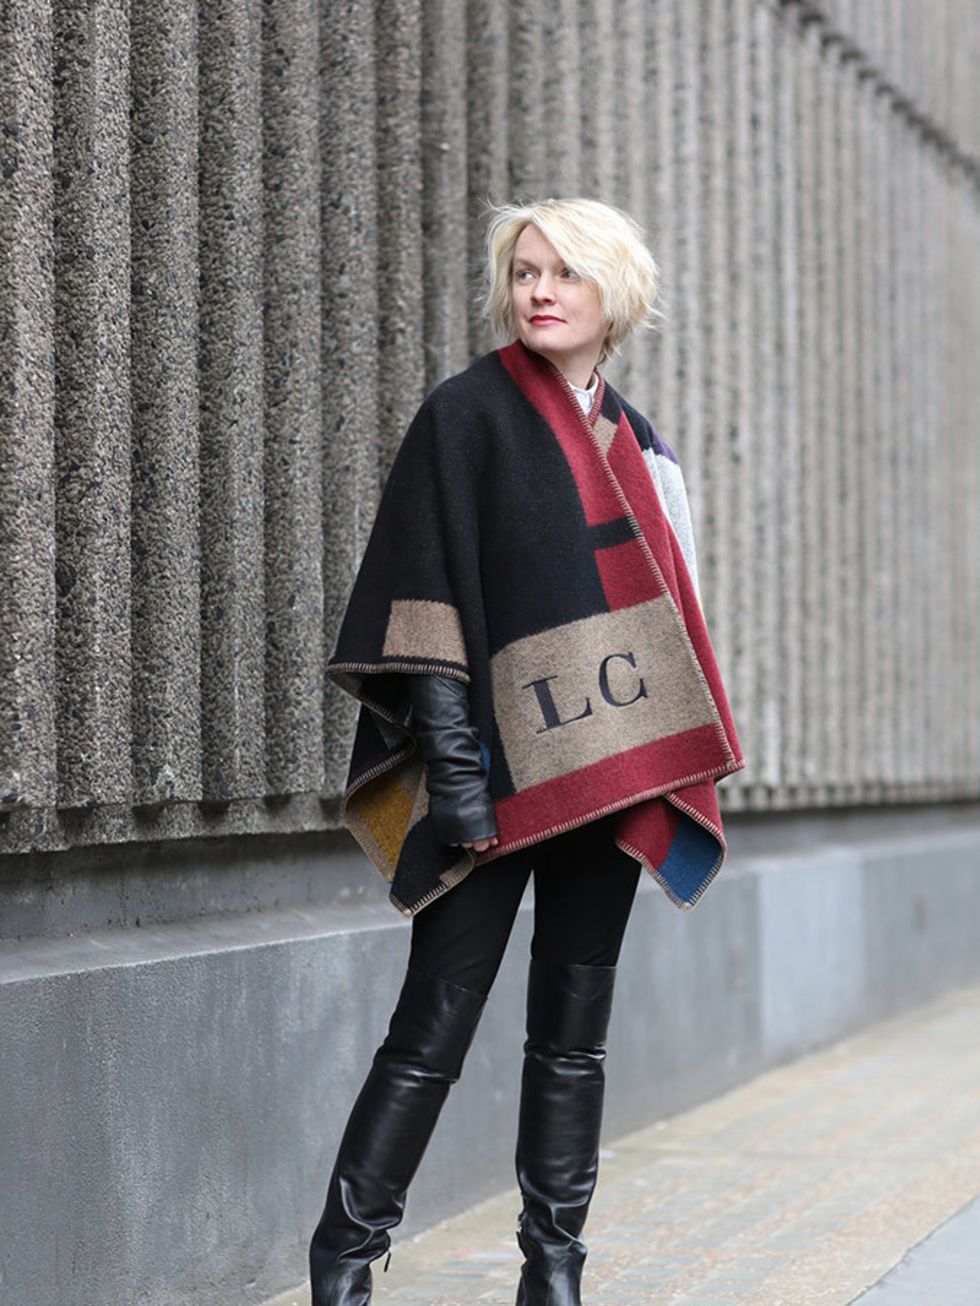 <p>Day 5:</p>

<p>Lorraine Candy - Editor-in-Chief</p>

<p>Burberry blanket, Rick Owens leather jacket, Carven shirt and Prada boots.</p>